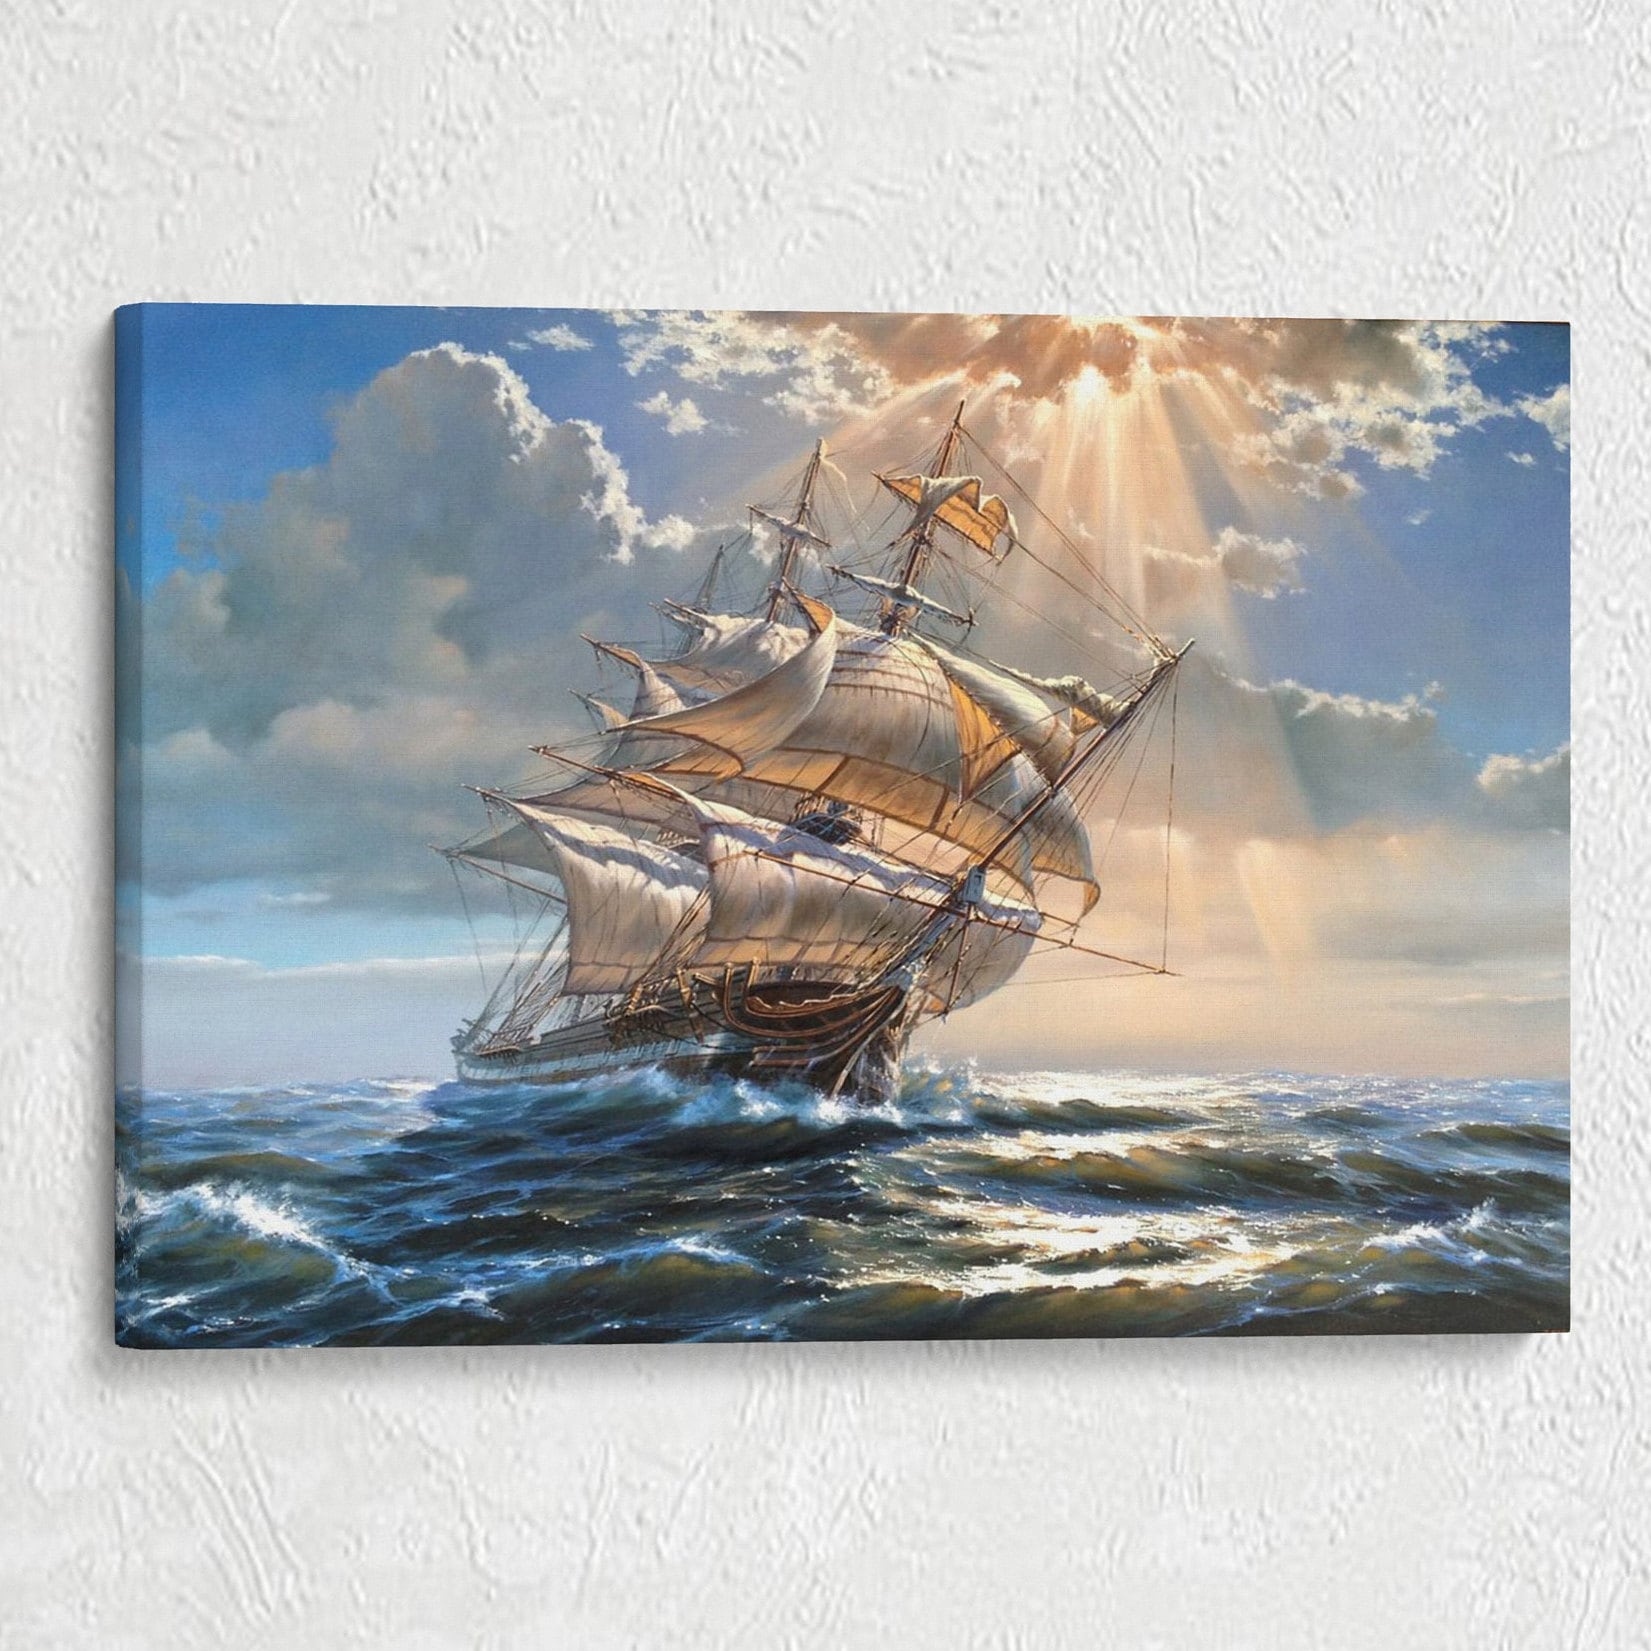 Ship Canvas, Pirate Ship Painting, Canvas Huge Room Art, Canvas Art, Art, Decor, Wall Etsy Canvas Wall Wall Boat Wall - Luxury Art Rowing